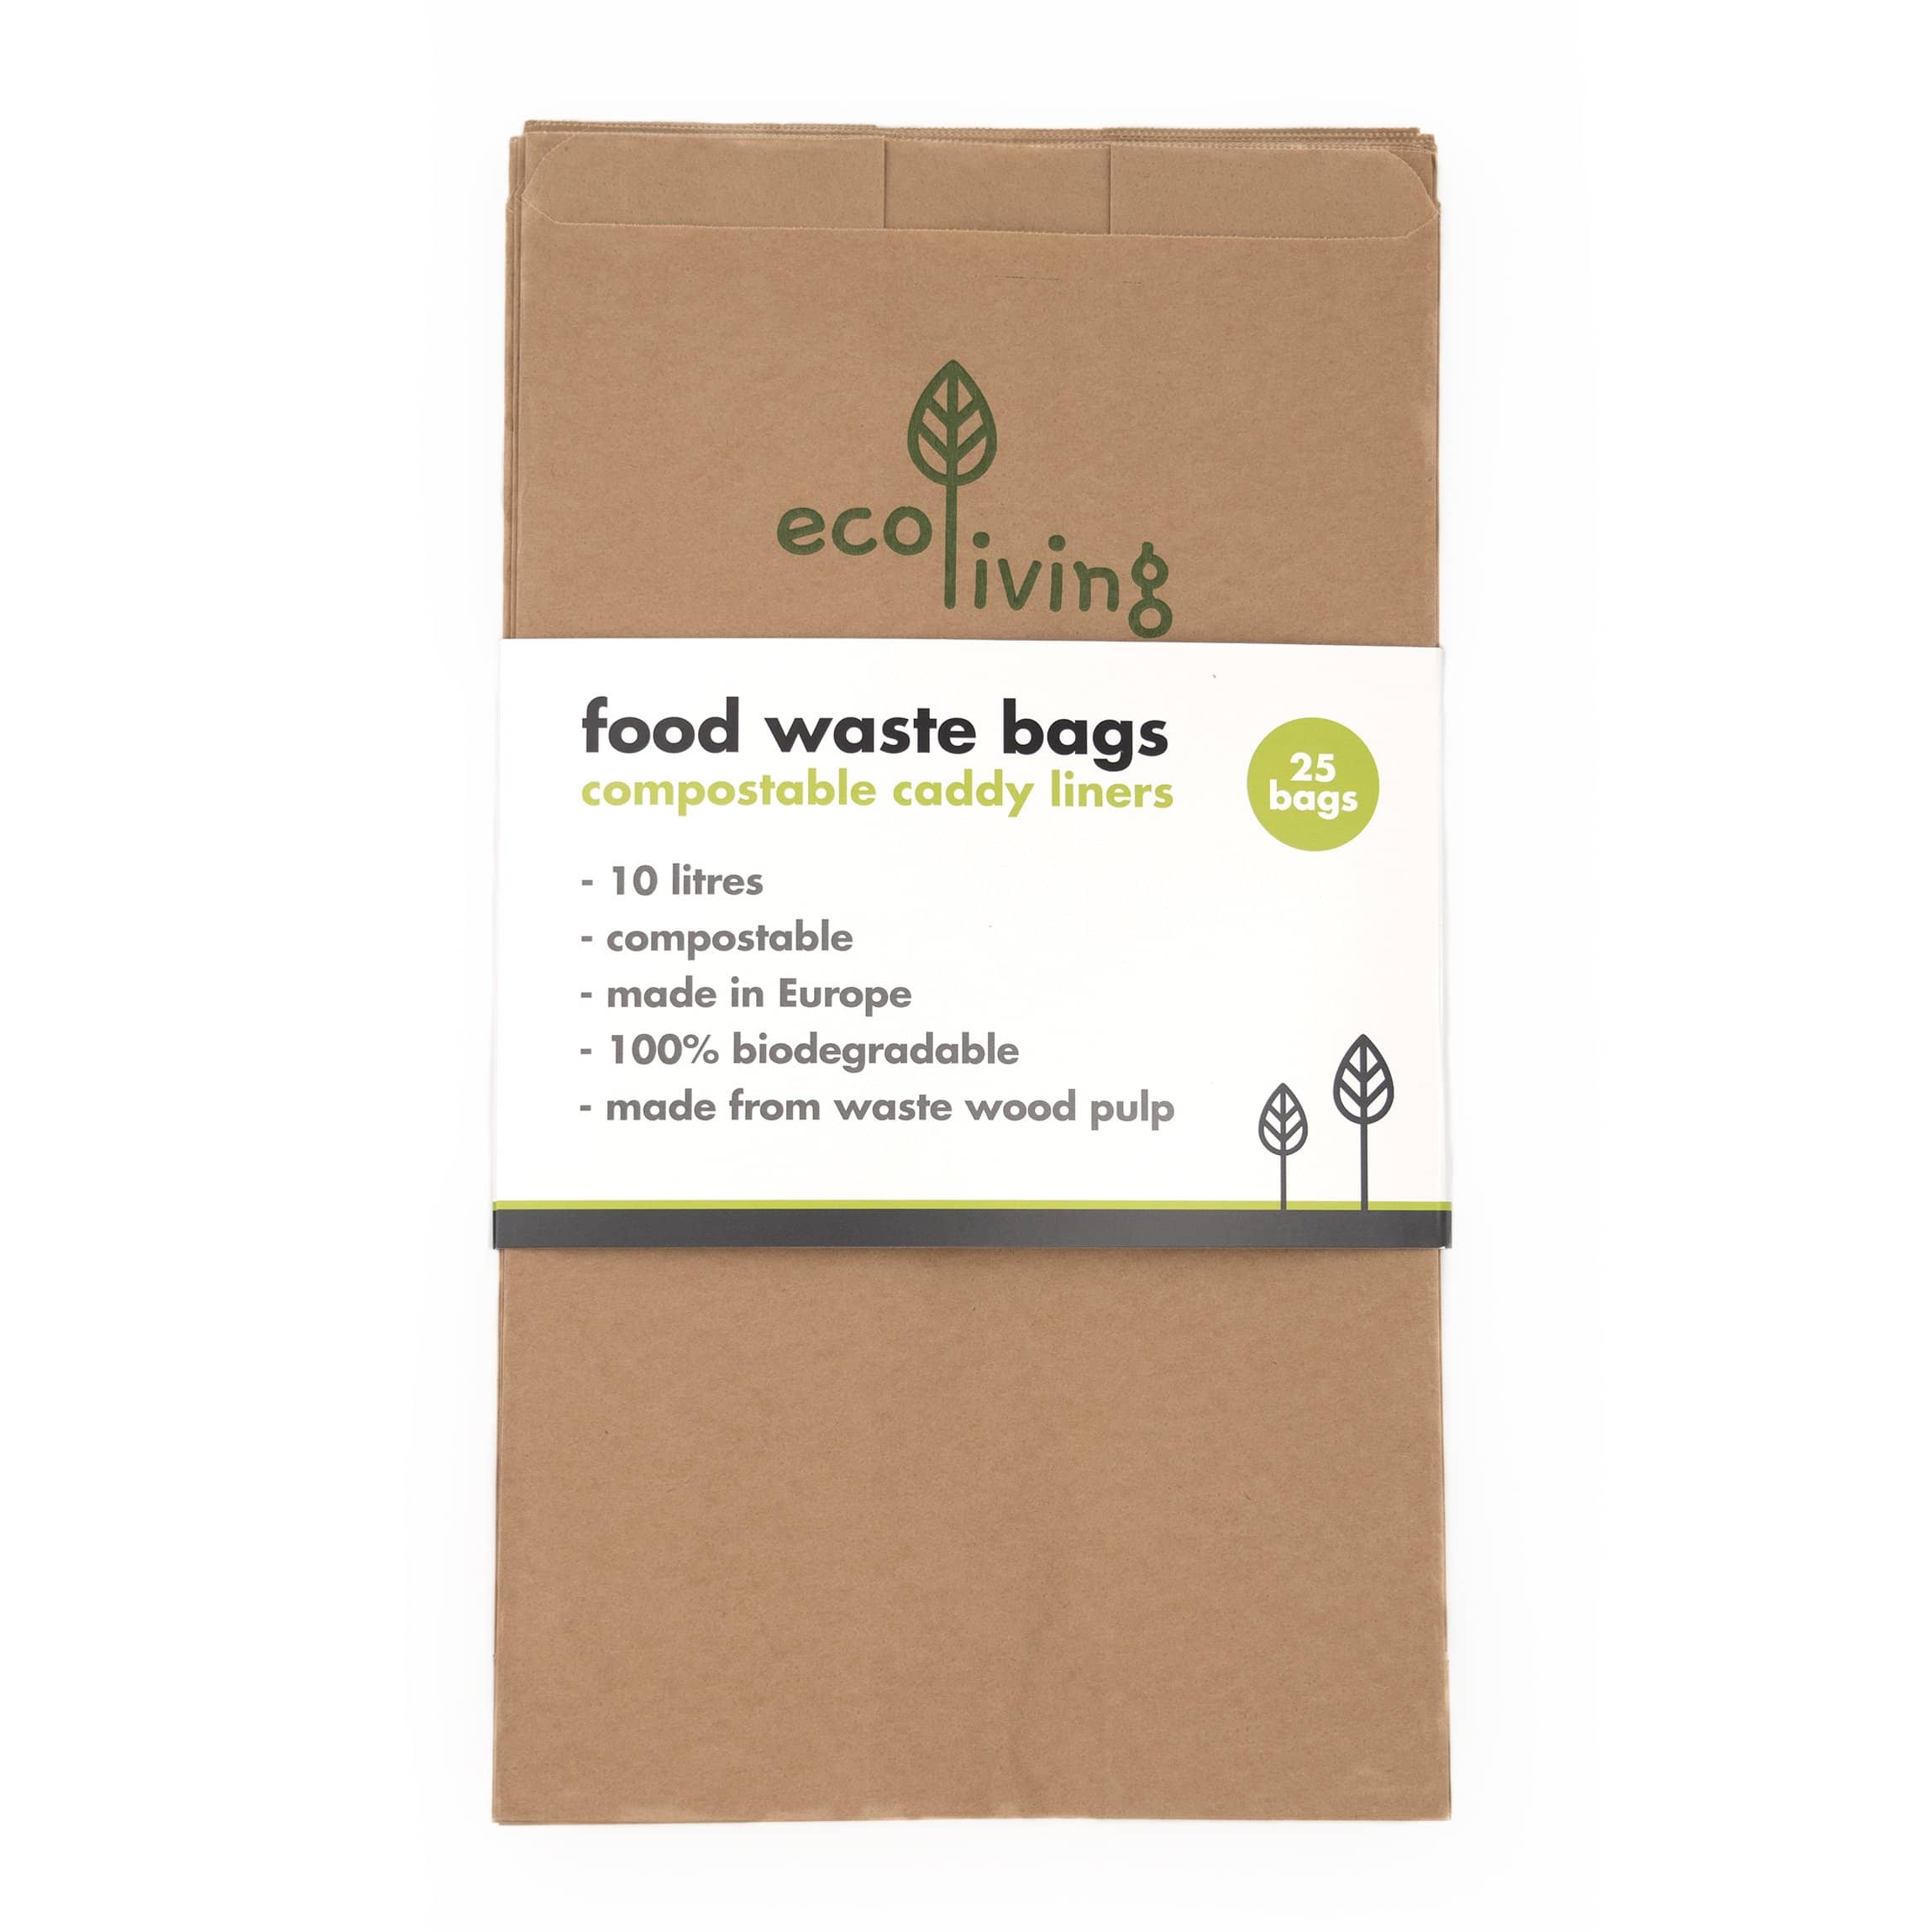 Paper bags for food recycling - Hobsons Bay